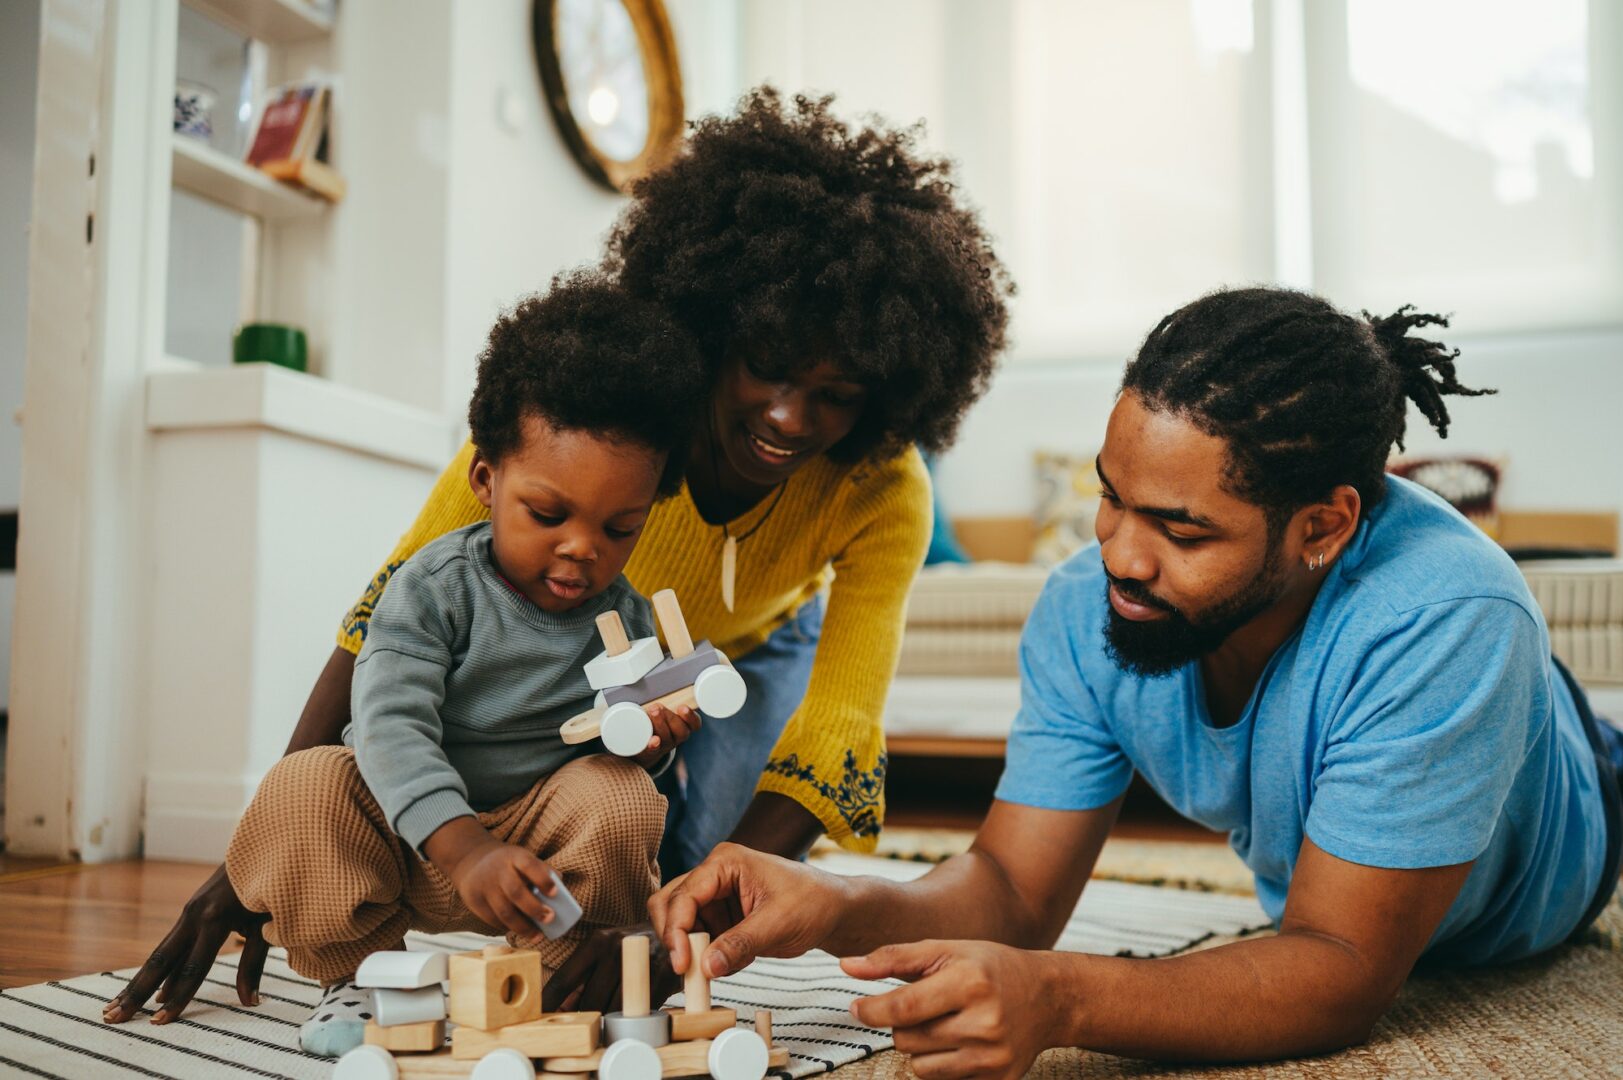 An african american kid is playing with his parents and learning shapes and colors through the game.